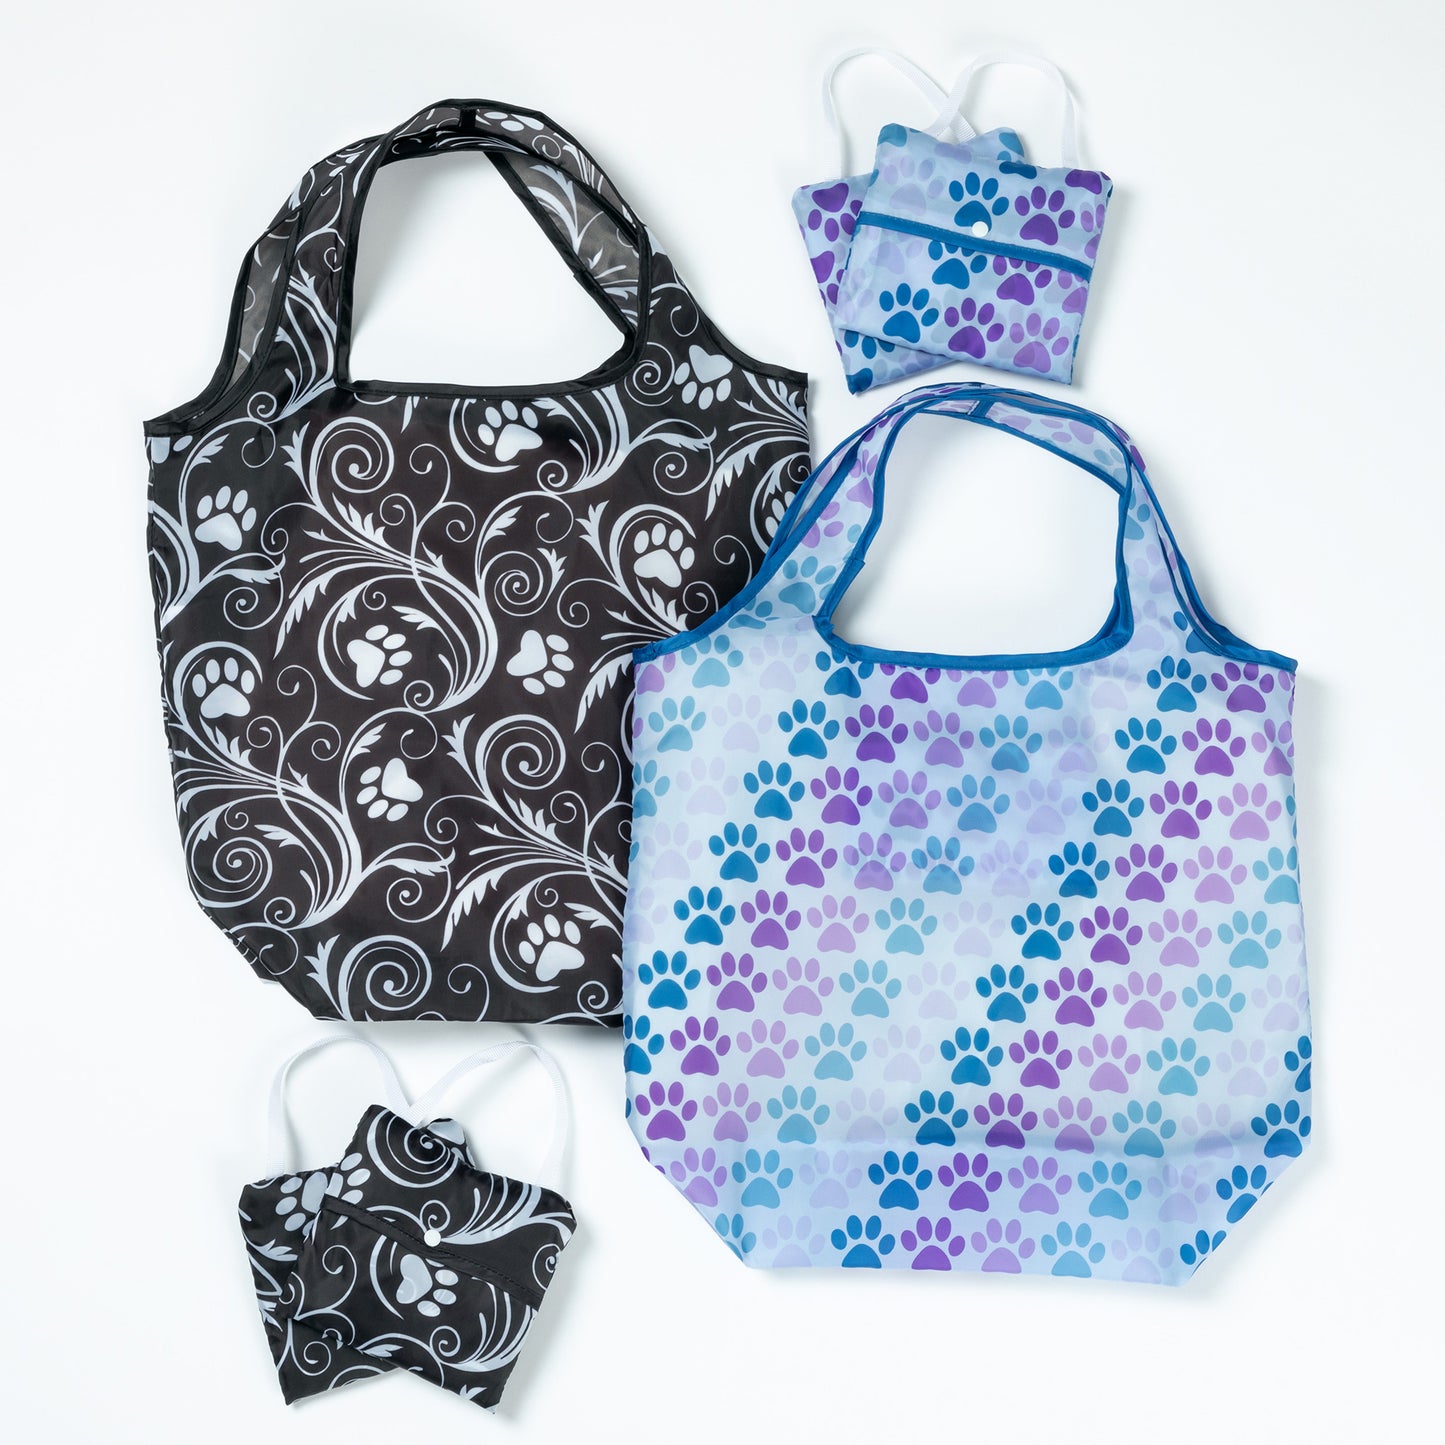 Paws & Pets Compact Shopping Bags - Set of 3